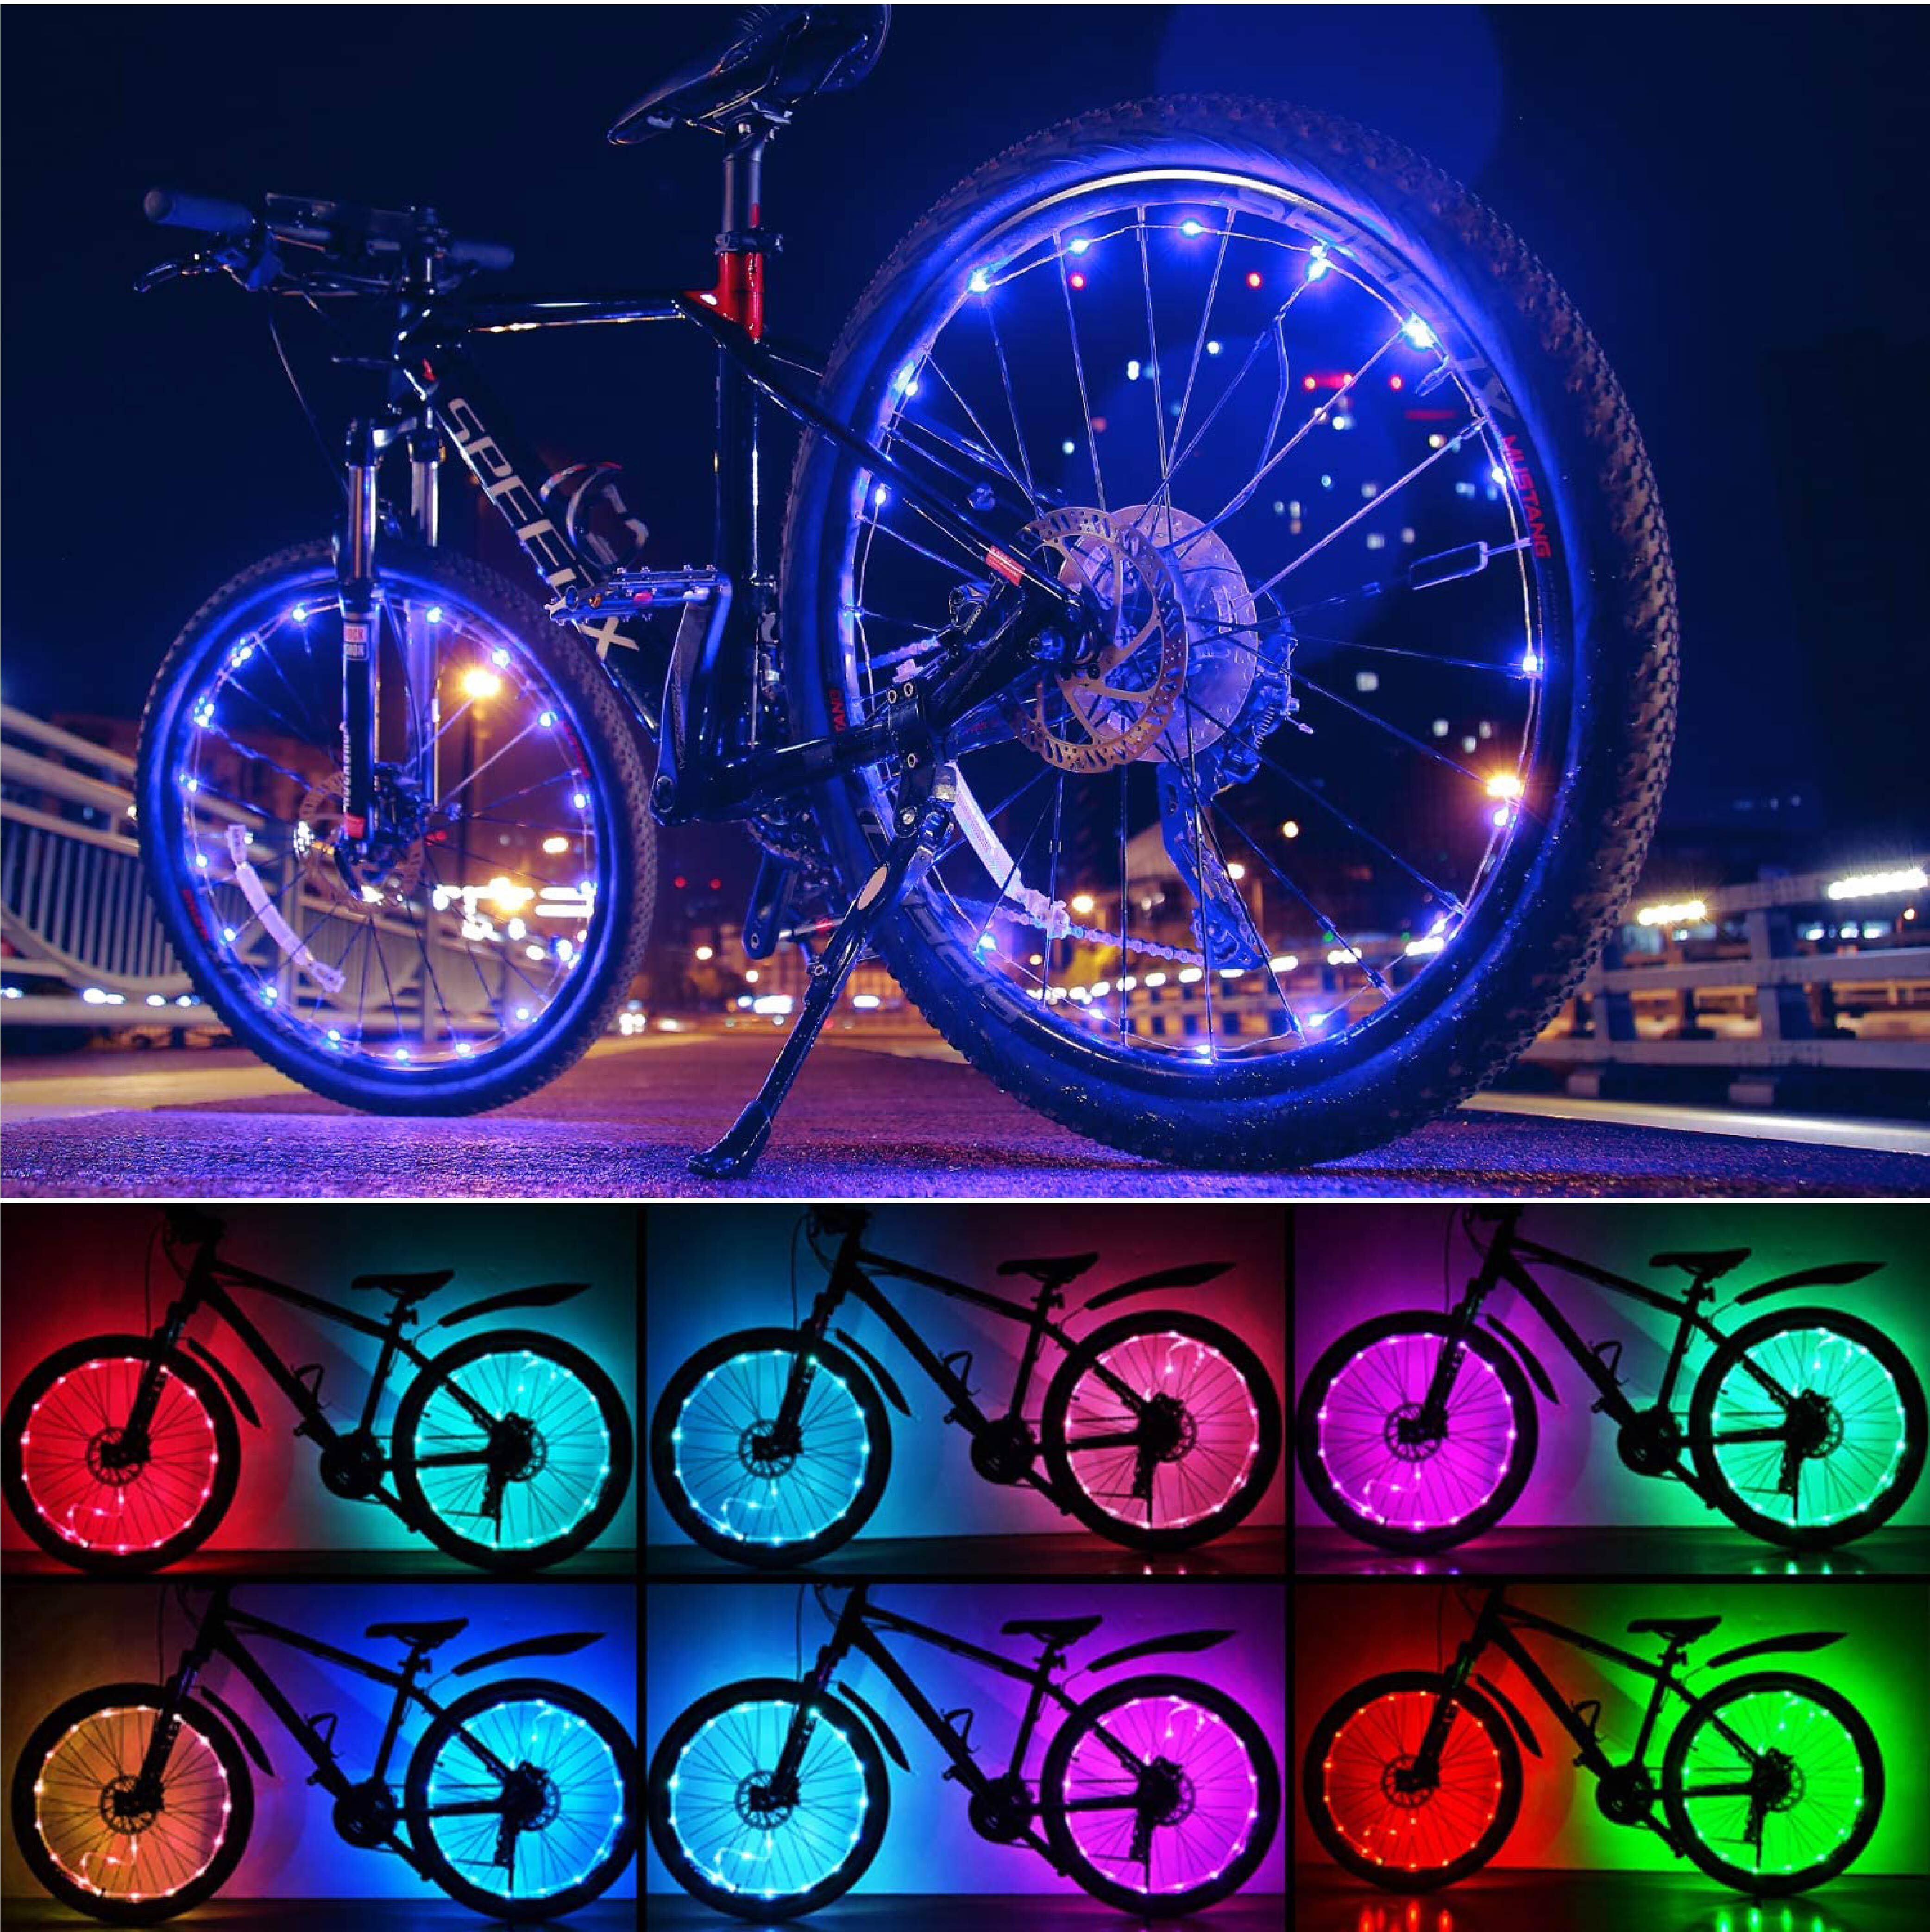 Kaitek LED Bicycle Wheel Accessory Light for 1 Wheel, Color-Changing ...